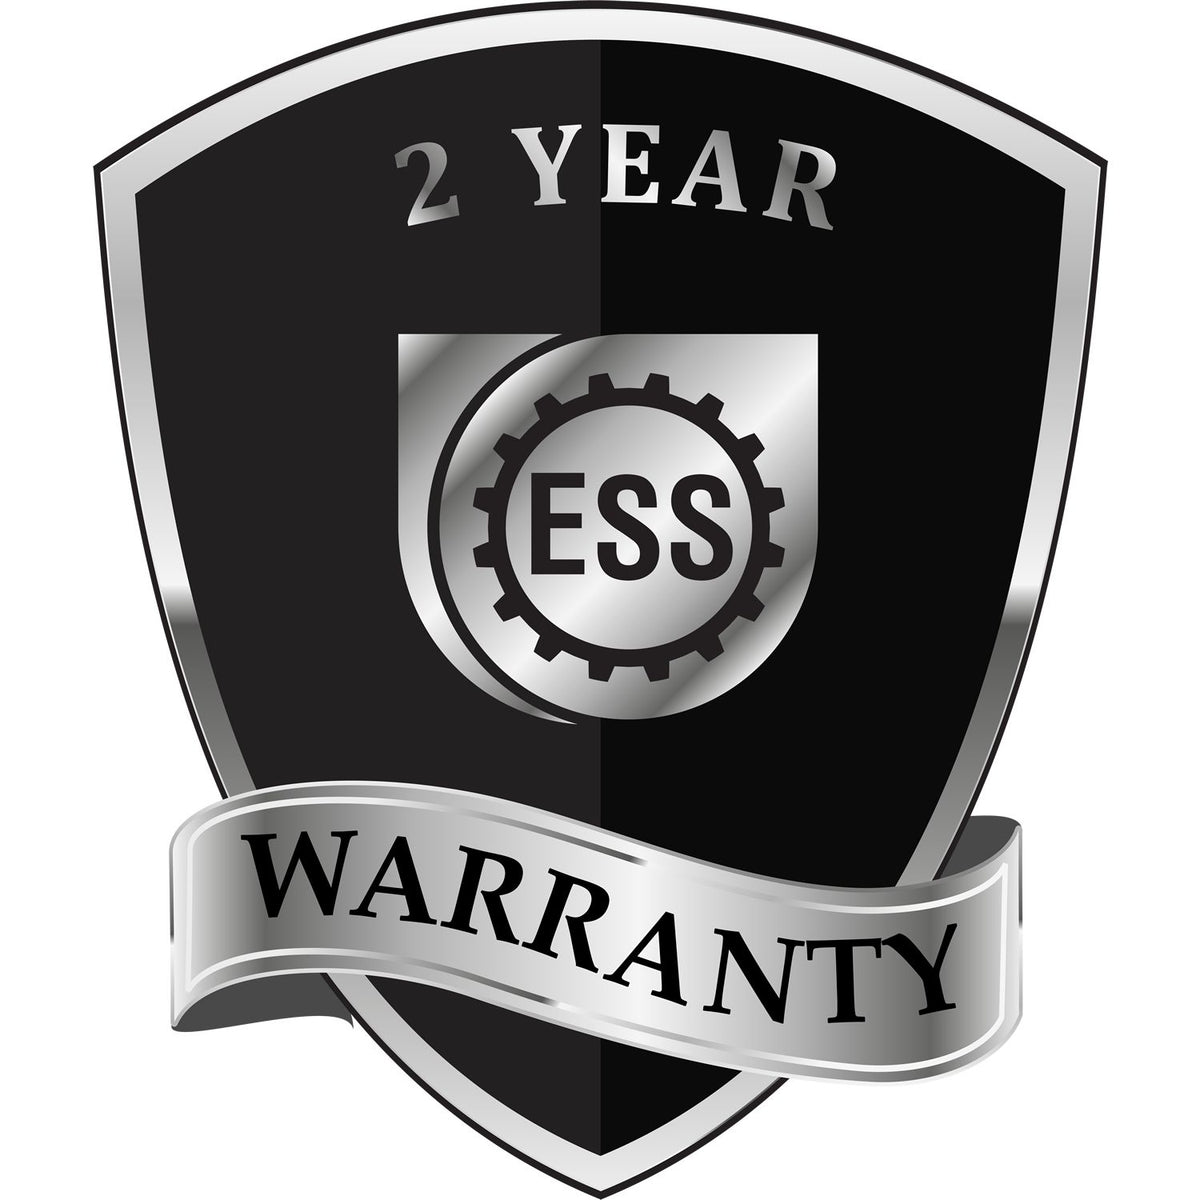 A black and silver badge or emblem showing warranty information for the Gift New Hampshire Architect Seal